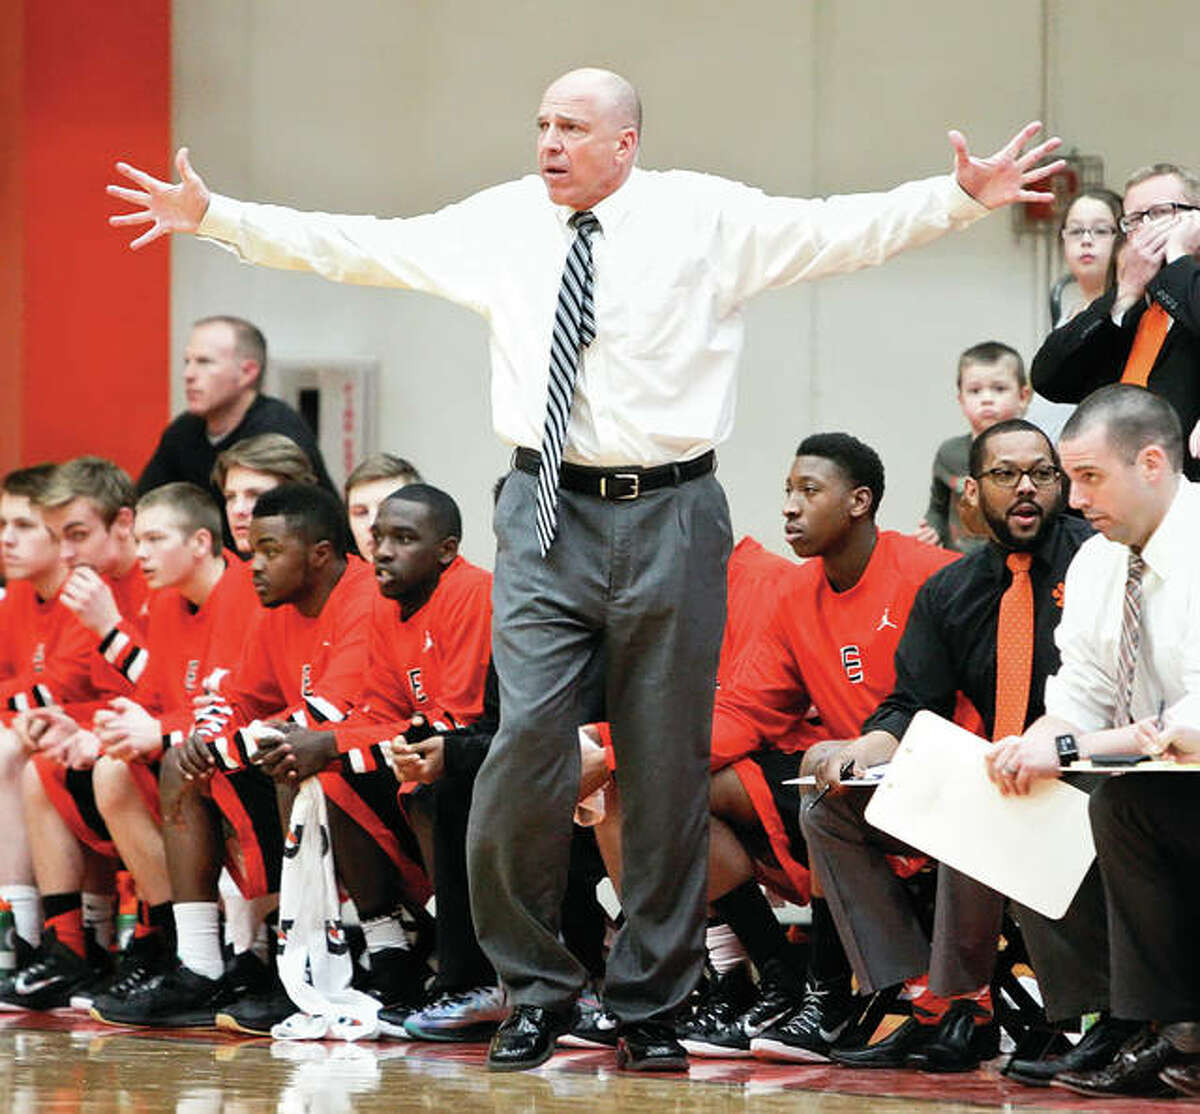 Edwardsville coach Mike Waldo begins enters his 36th season as a head coach and his 31st at Edwardsville with a career record of 709-257.